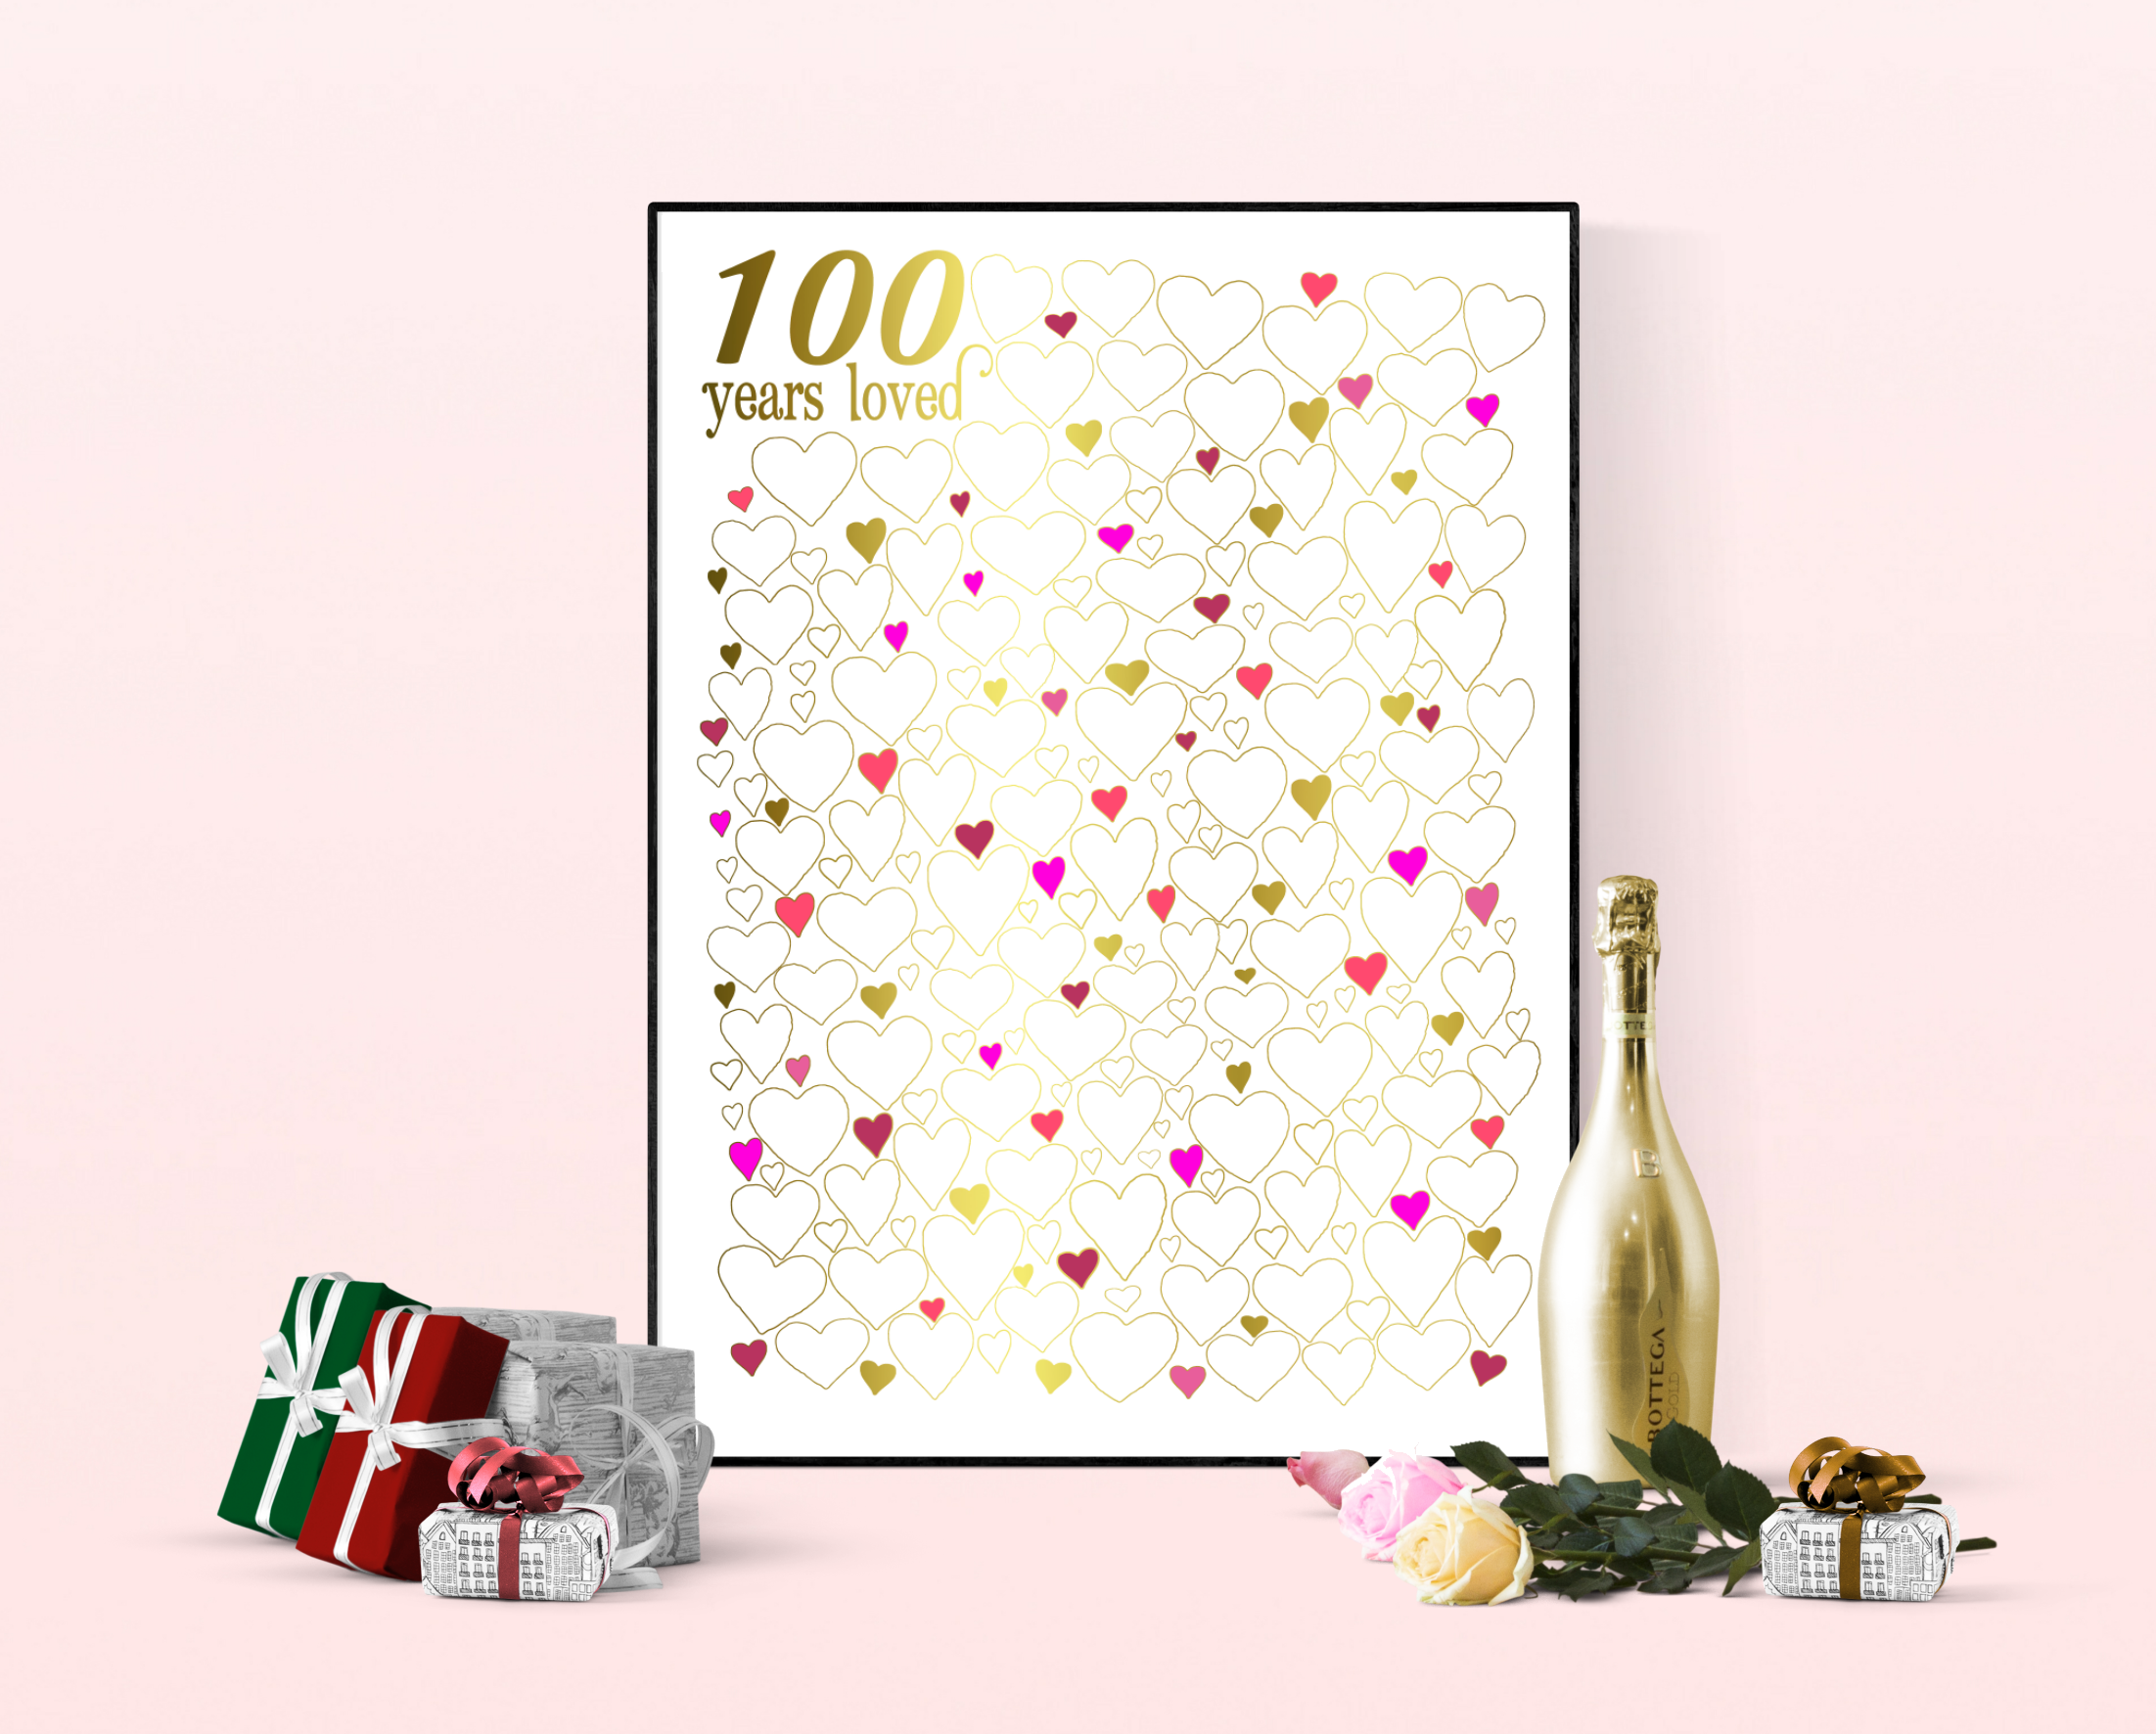 100 years loved poster - 100th birthday gift idea www.fromtherookery.com